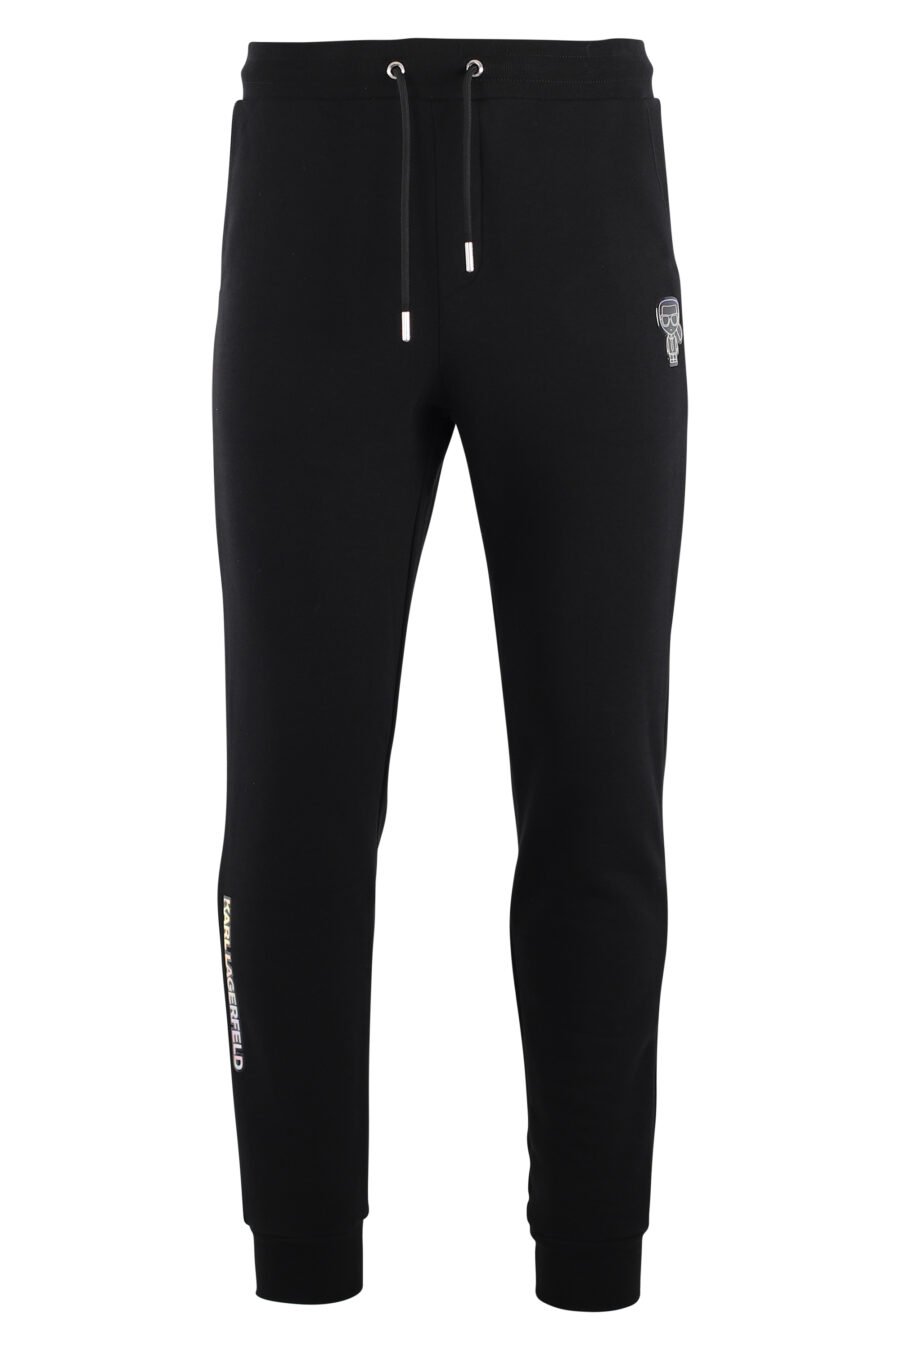 Tracksuit bottoms black with iridescent logo - IMG 7545